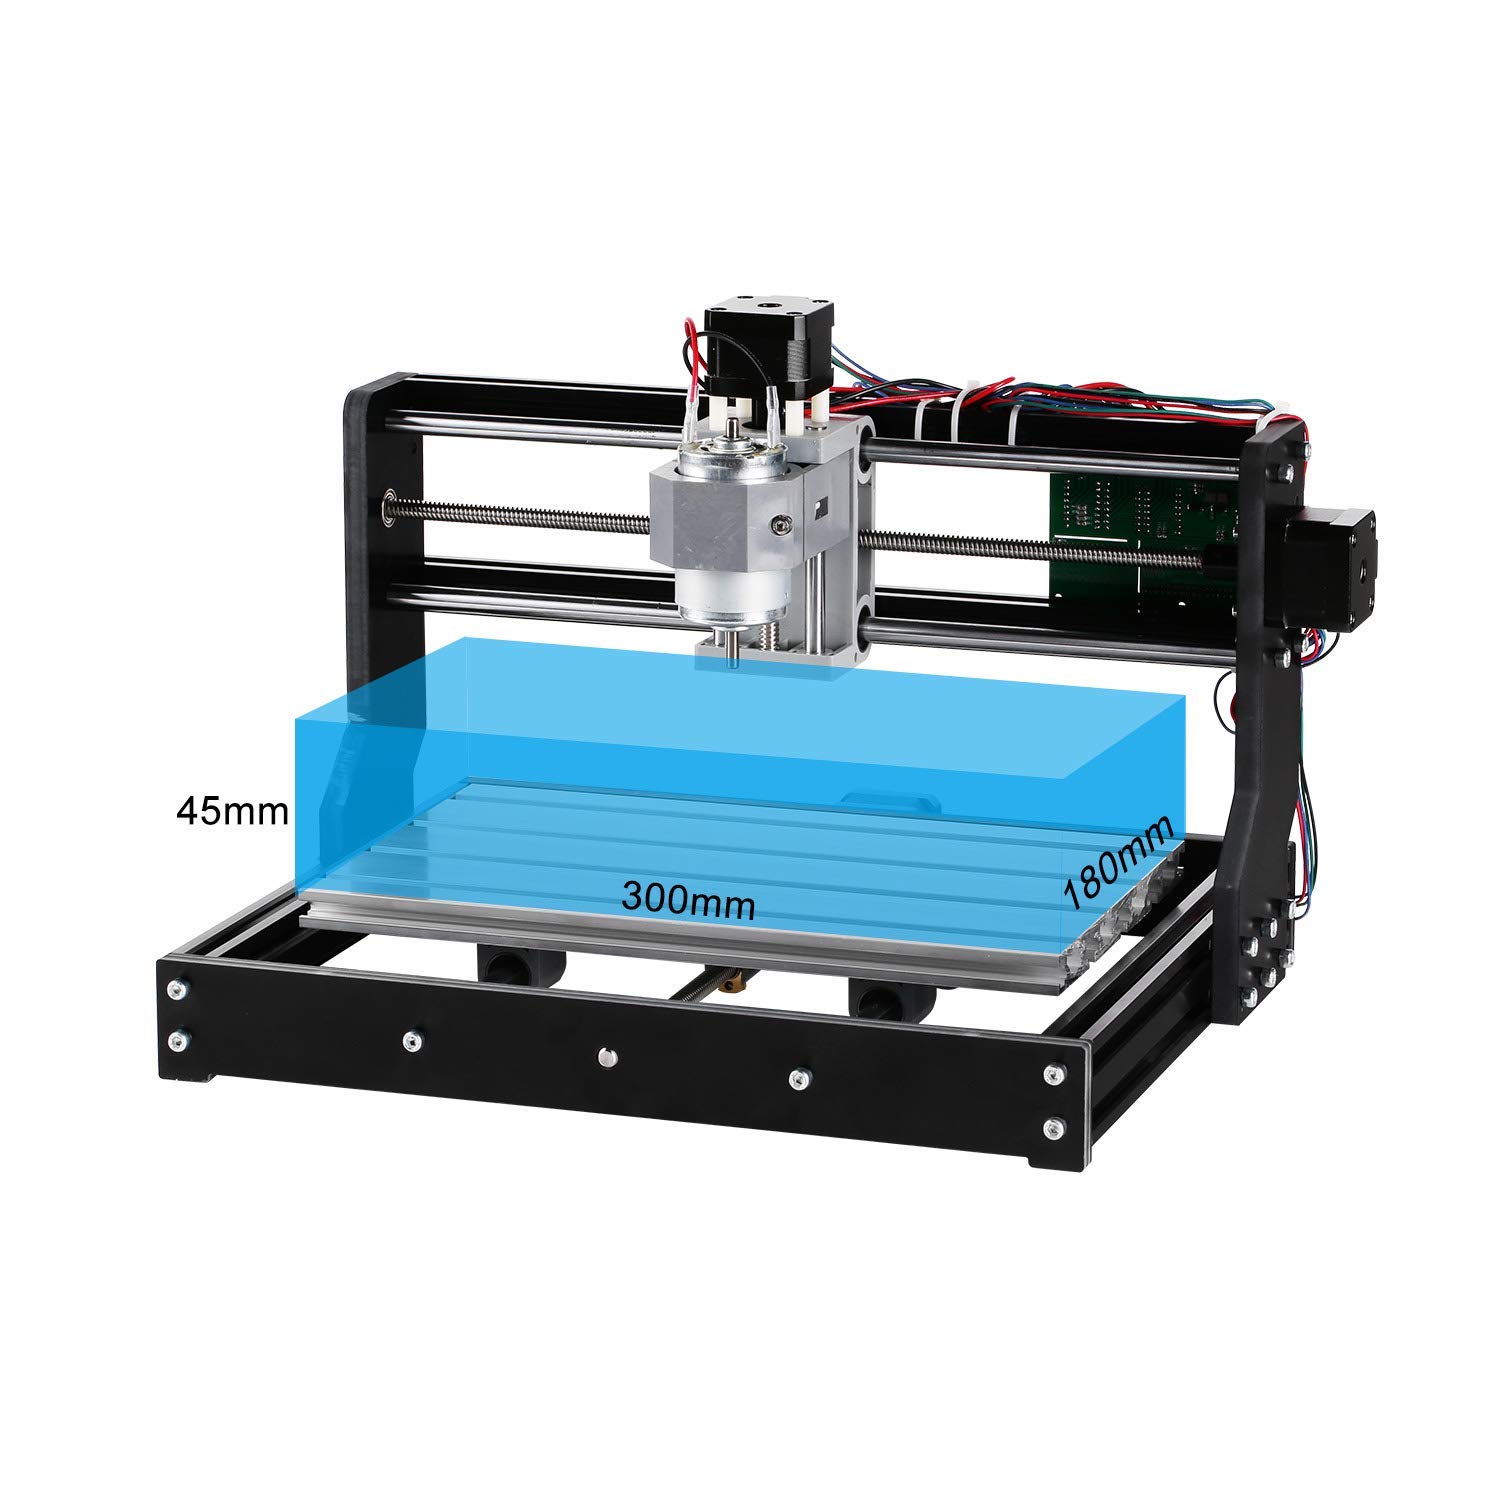 Fanrsquoensheng-3018-Pro-3-Axis-Mini-DIY-CNC-Router-Adjustable-Speed-Spindle-Motor-Wood-Engraving-Ma-1463876-7